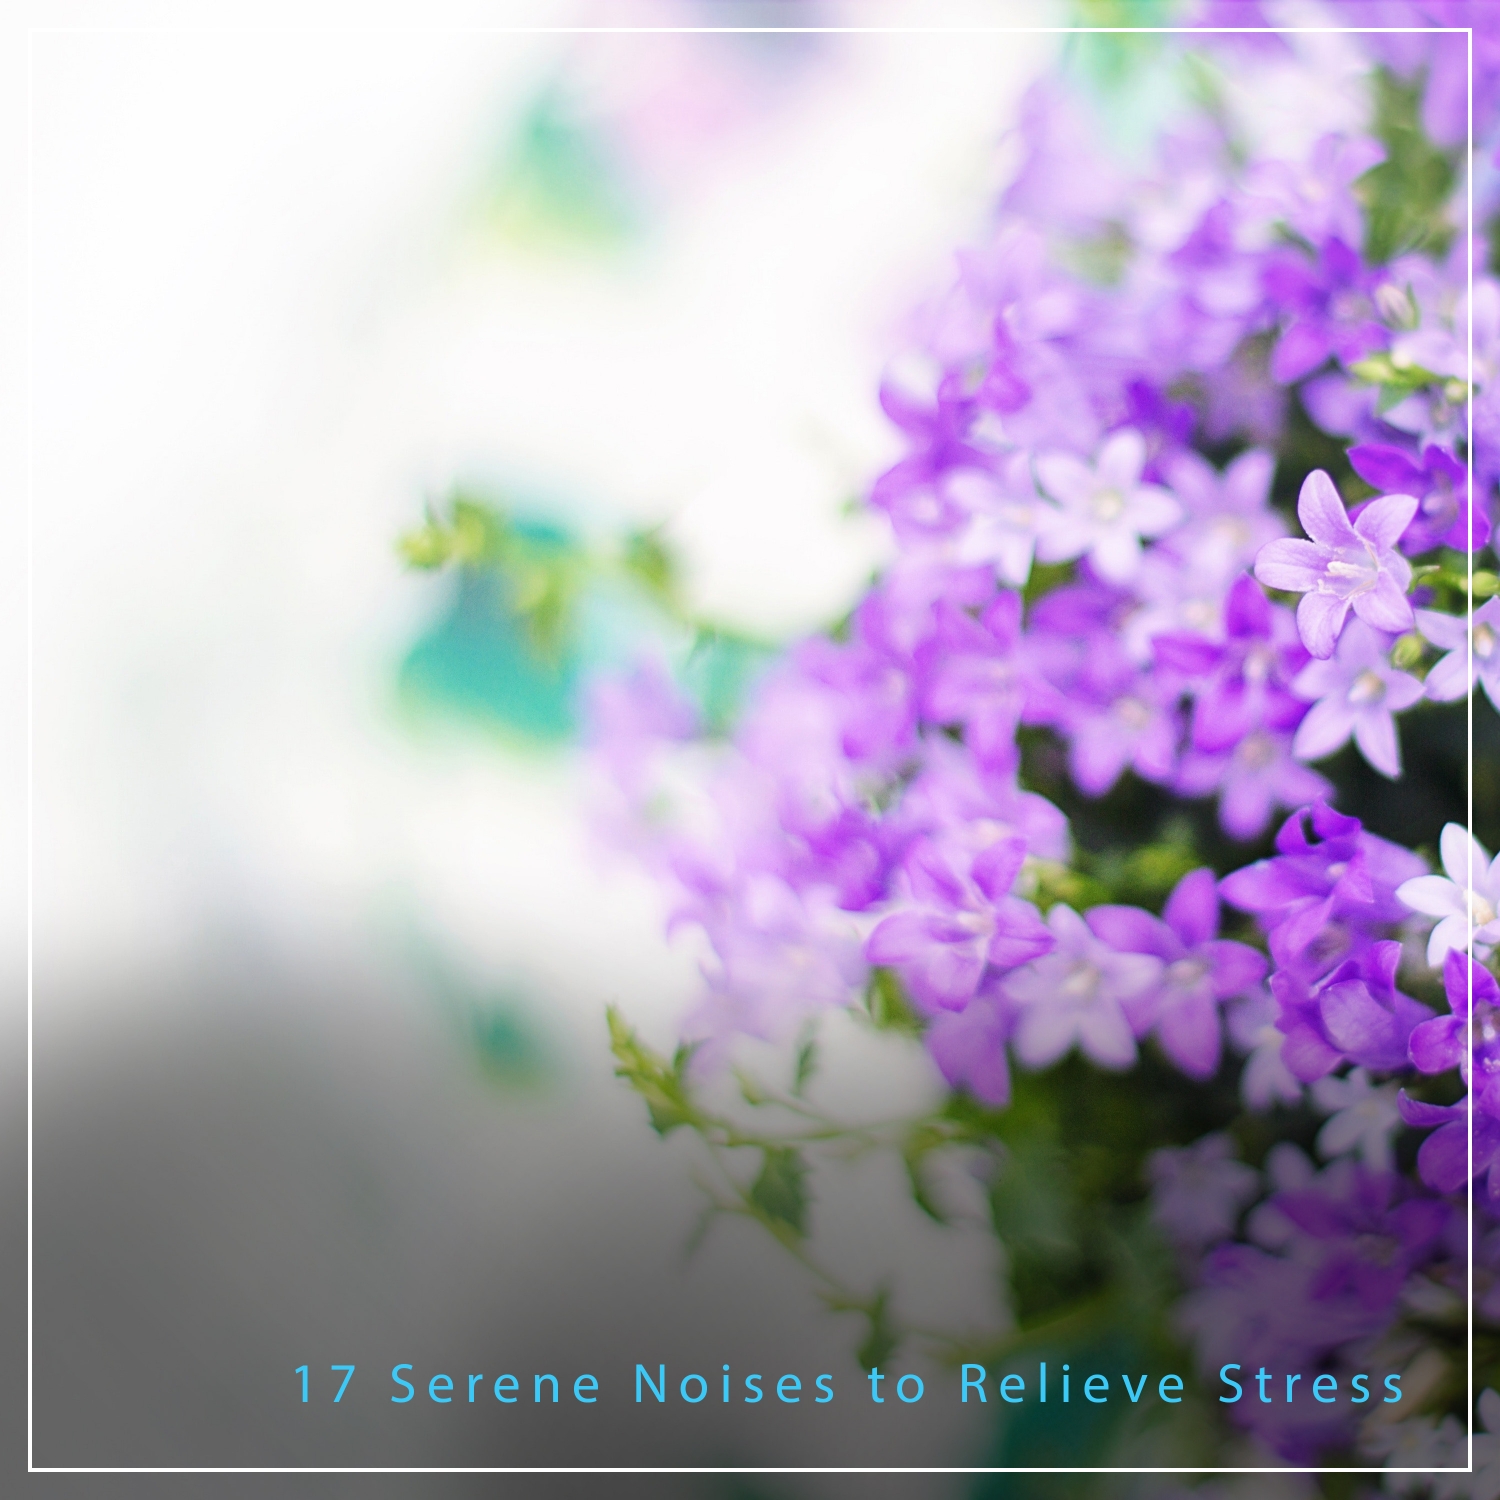 17 Serene Noises to Relieve Stress